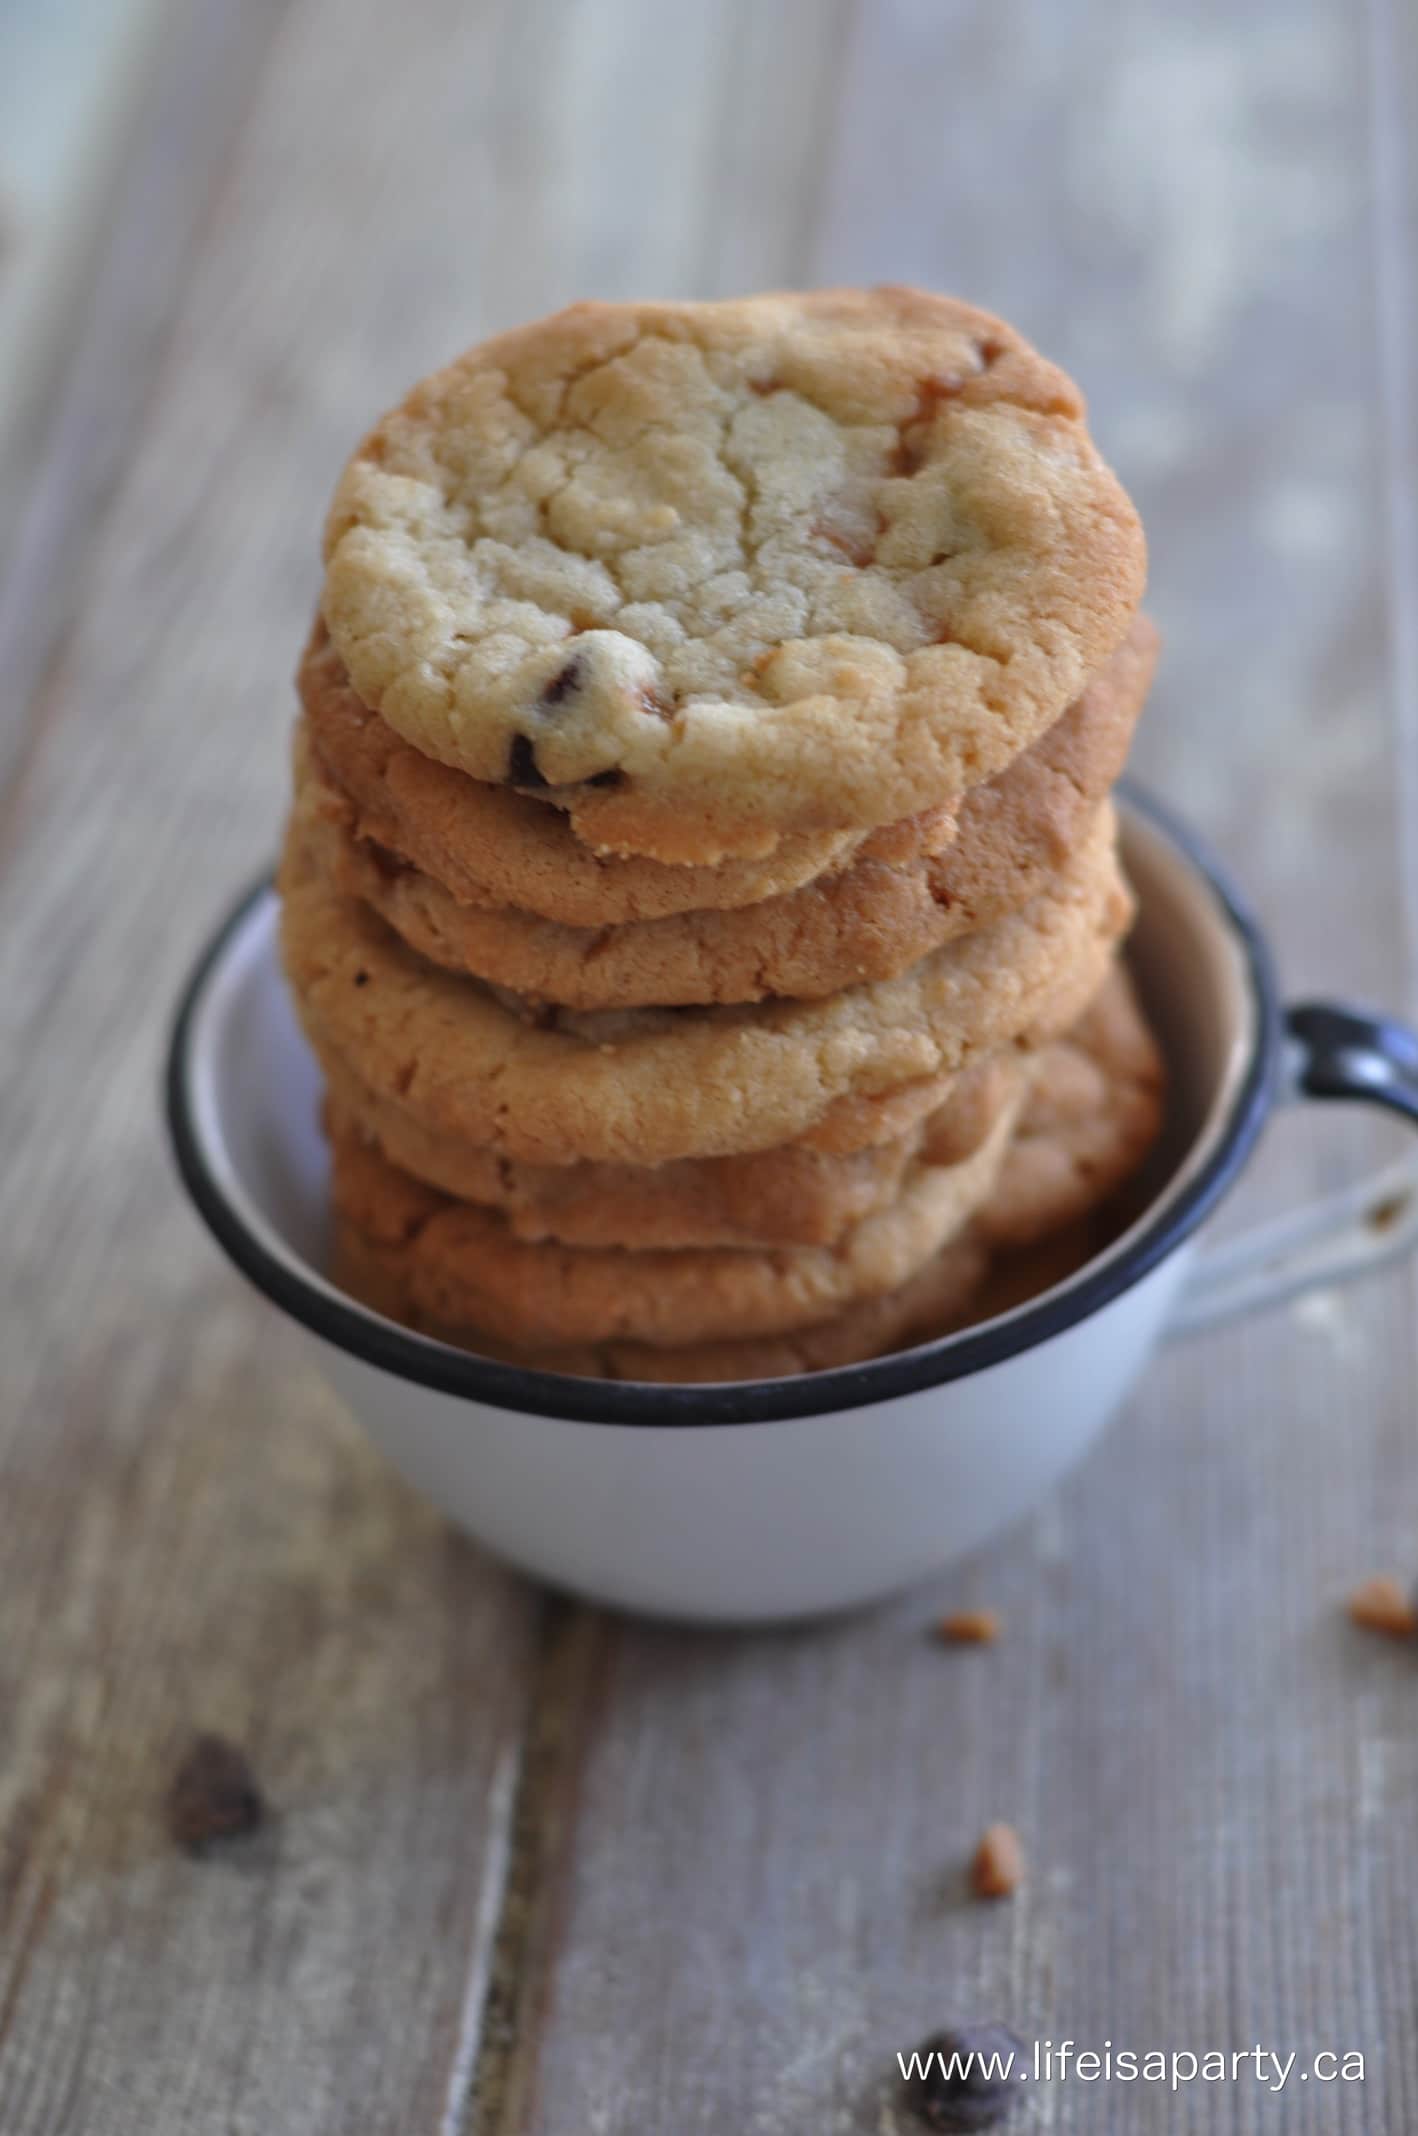 Toffee Chocolate Chip Cookies recipe